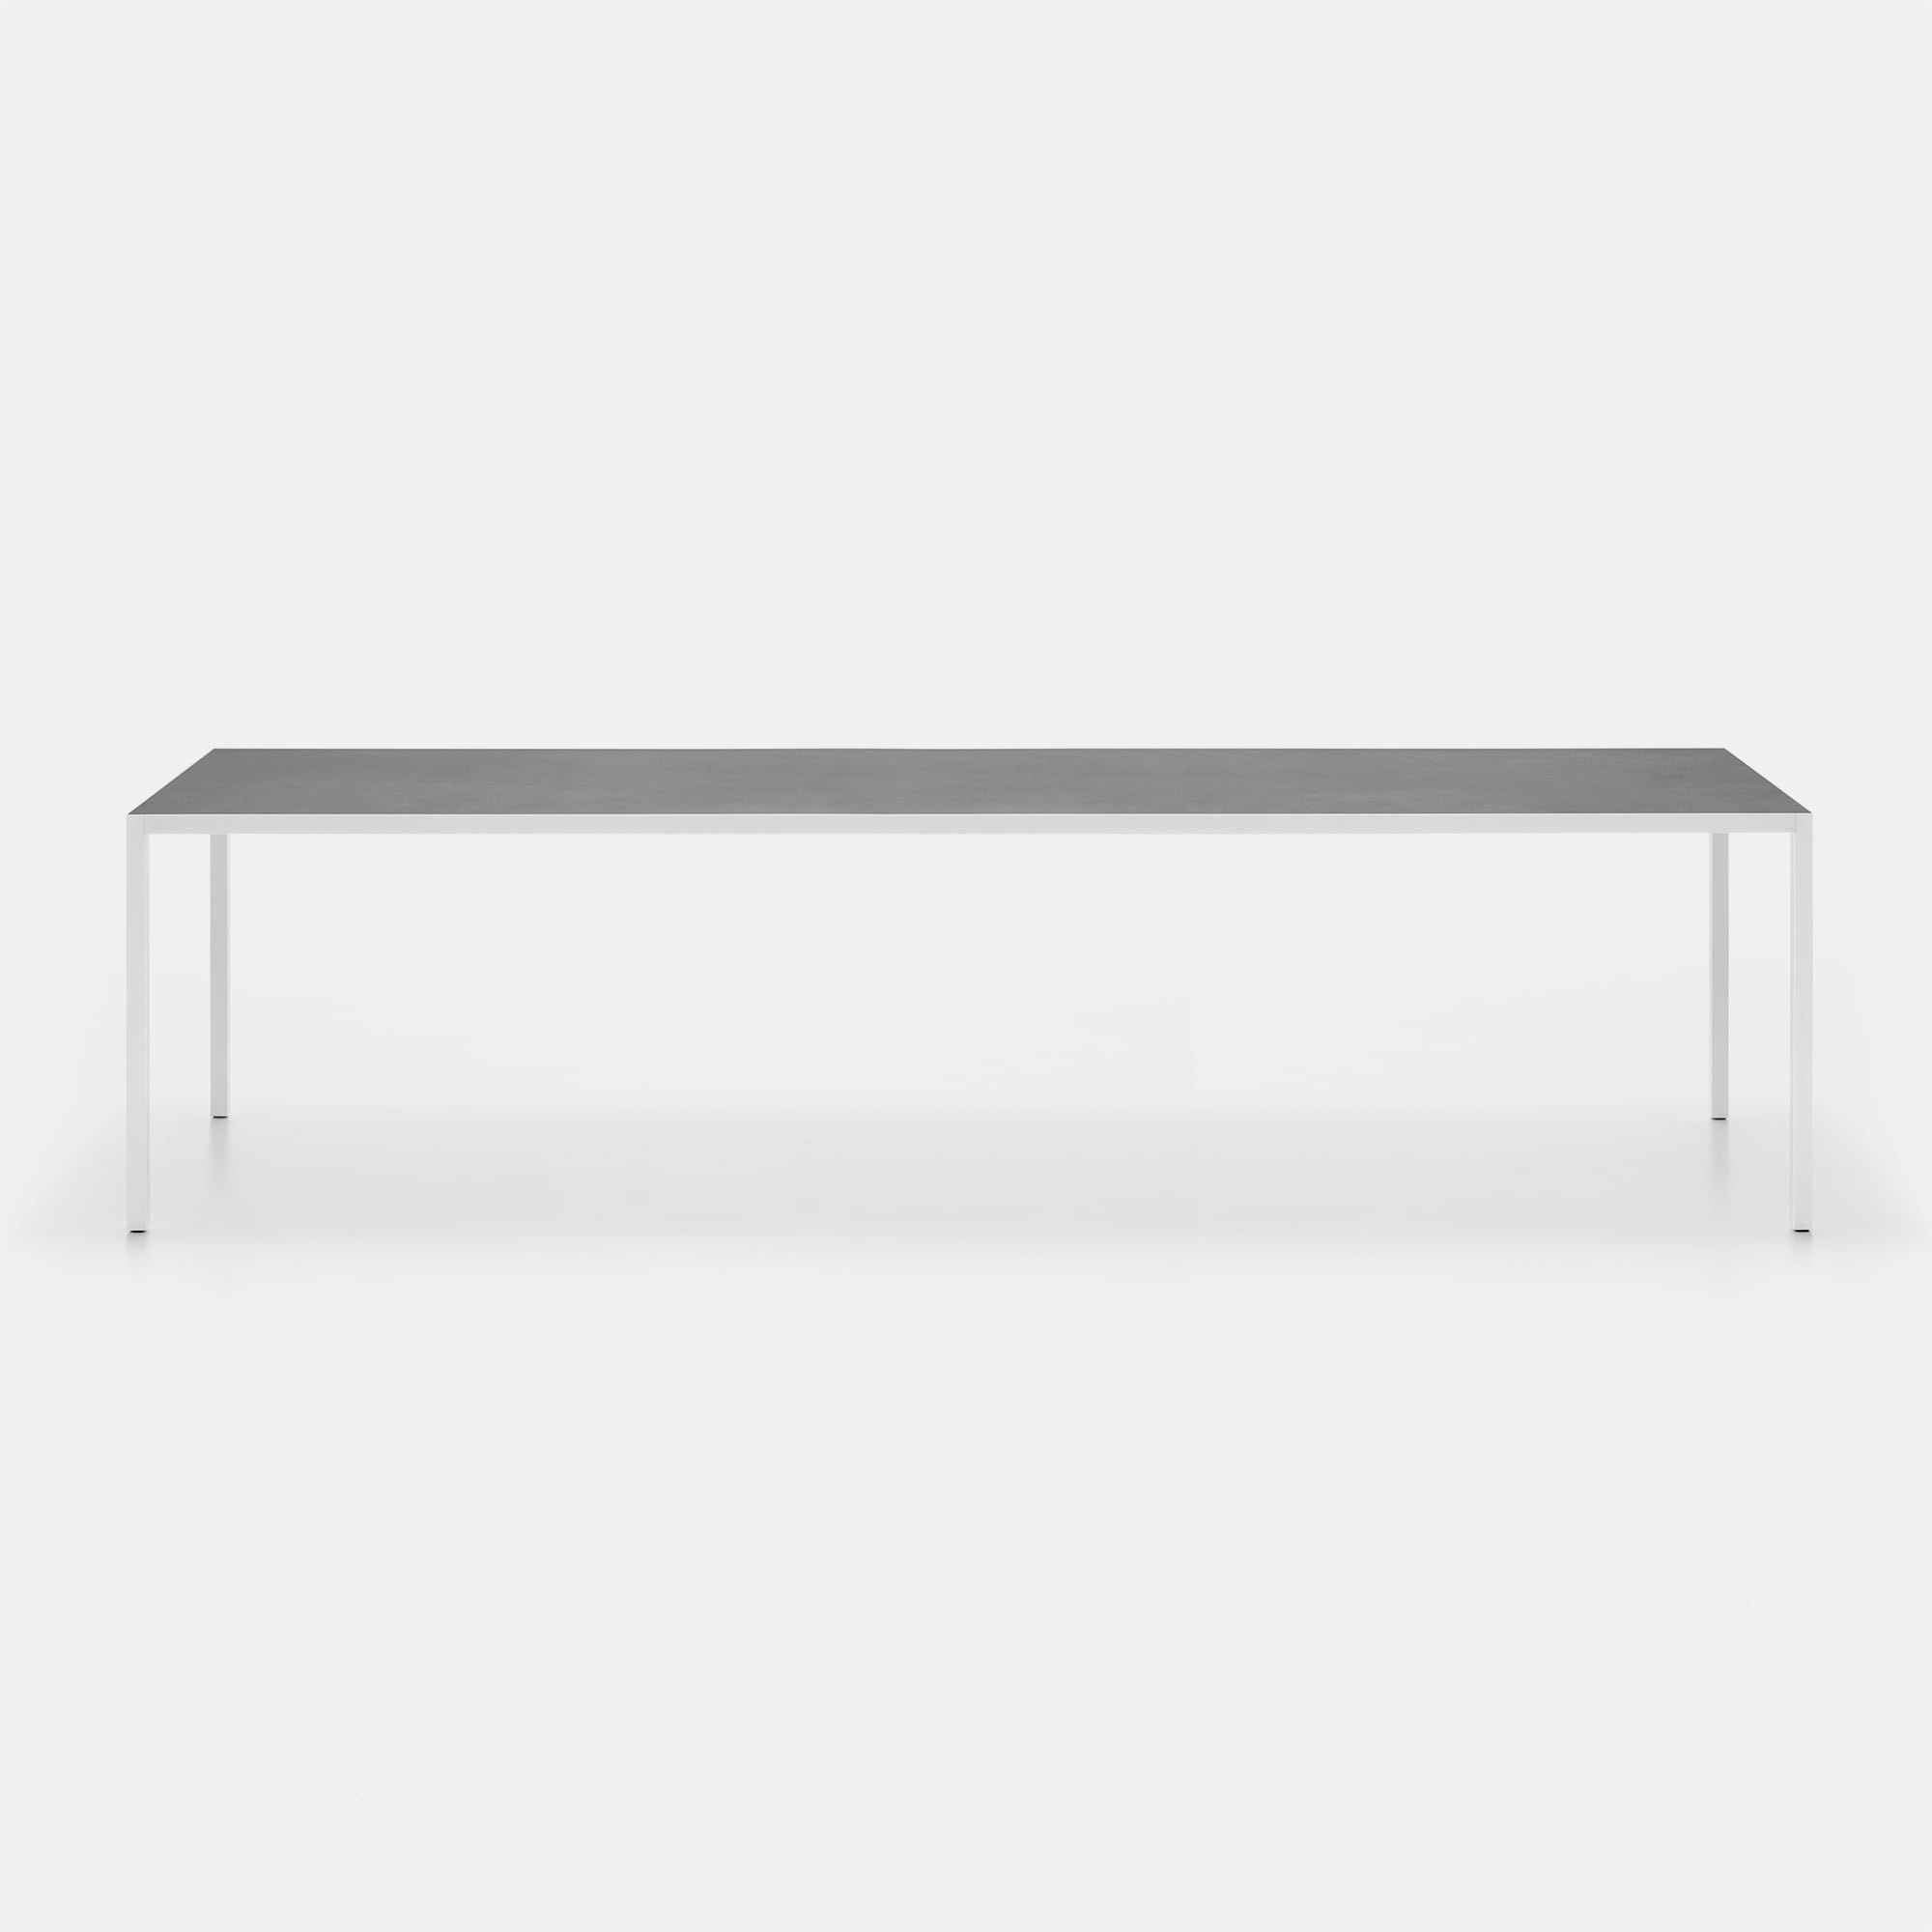 Lim 3.0. Lightweight, thin table with a unique design. MDF Italia.